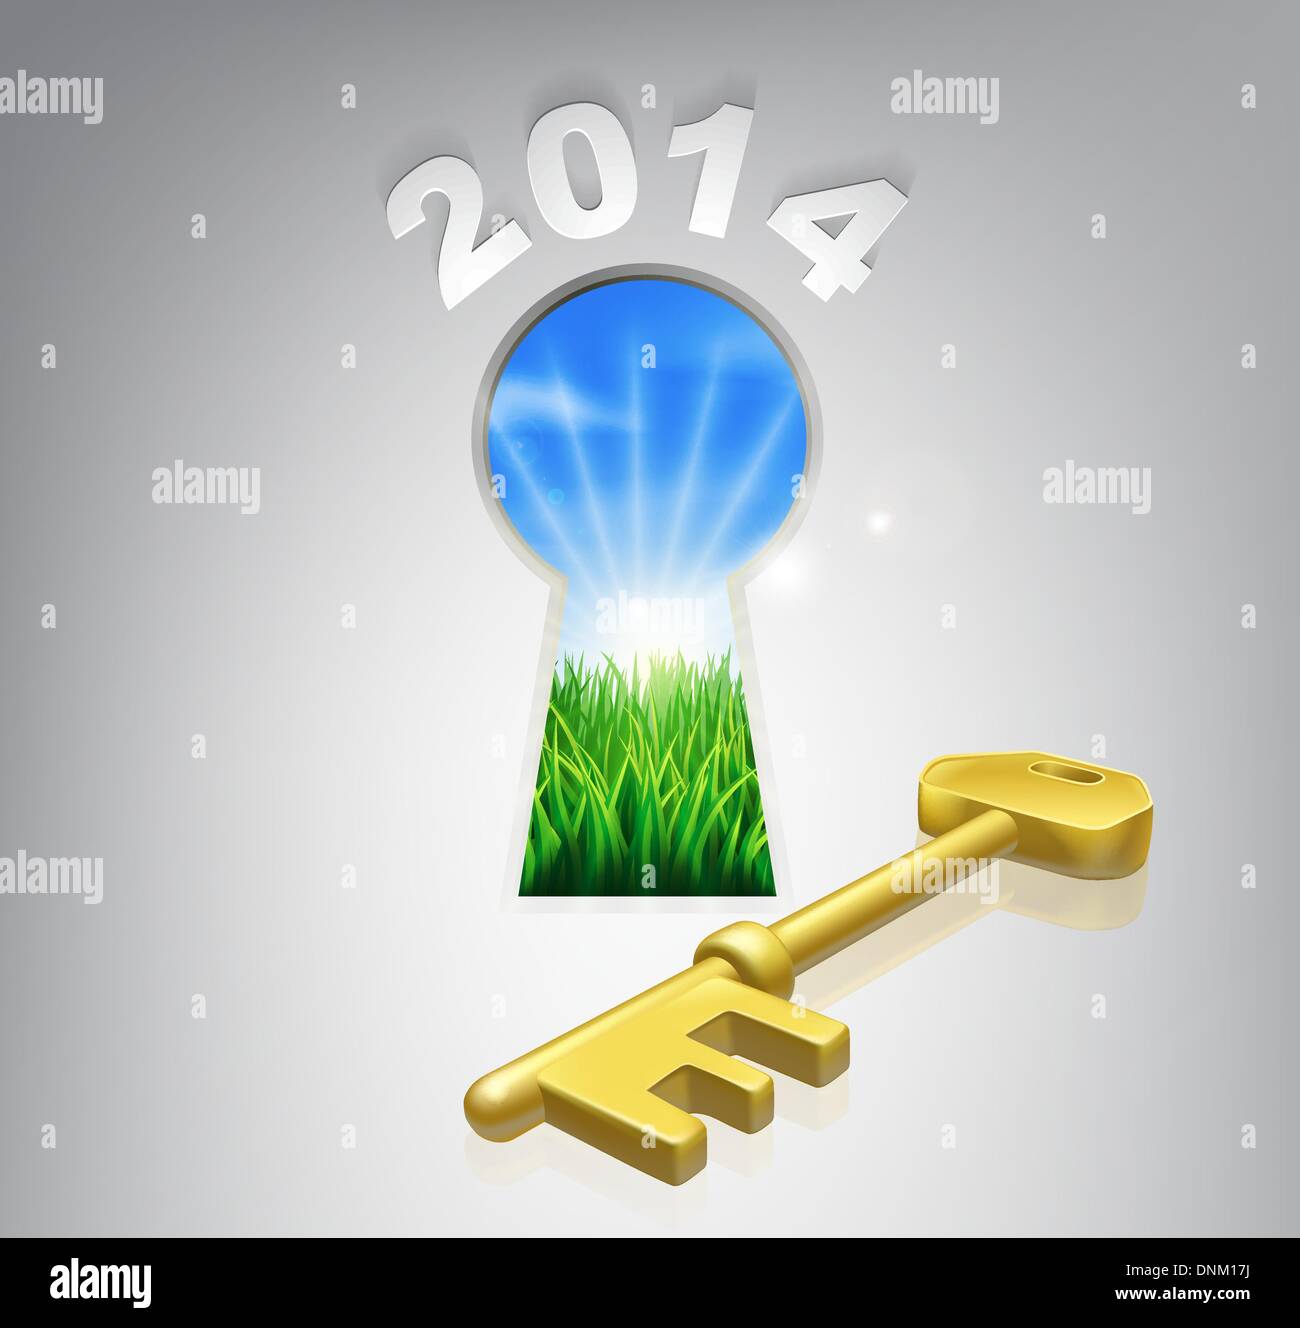 Key to the future 2014 concept of a keyhole with a new dawn over verdant landscape and gold key Stock Vector